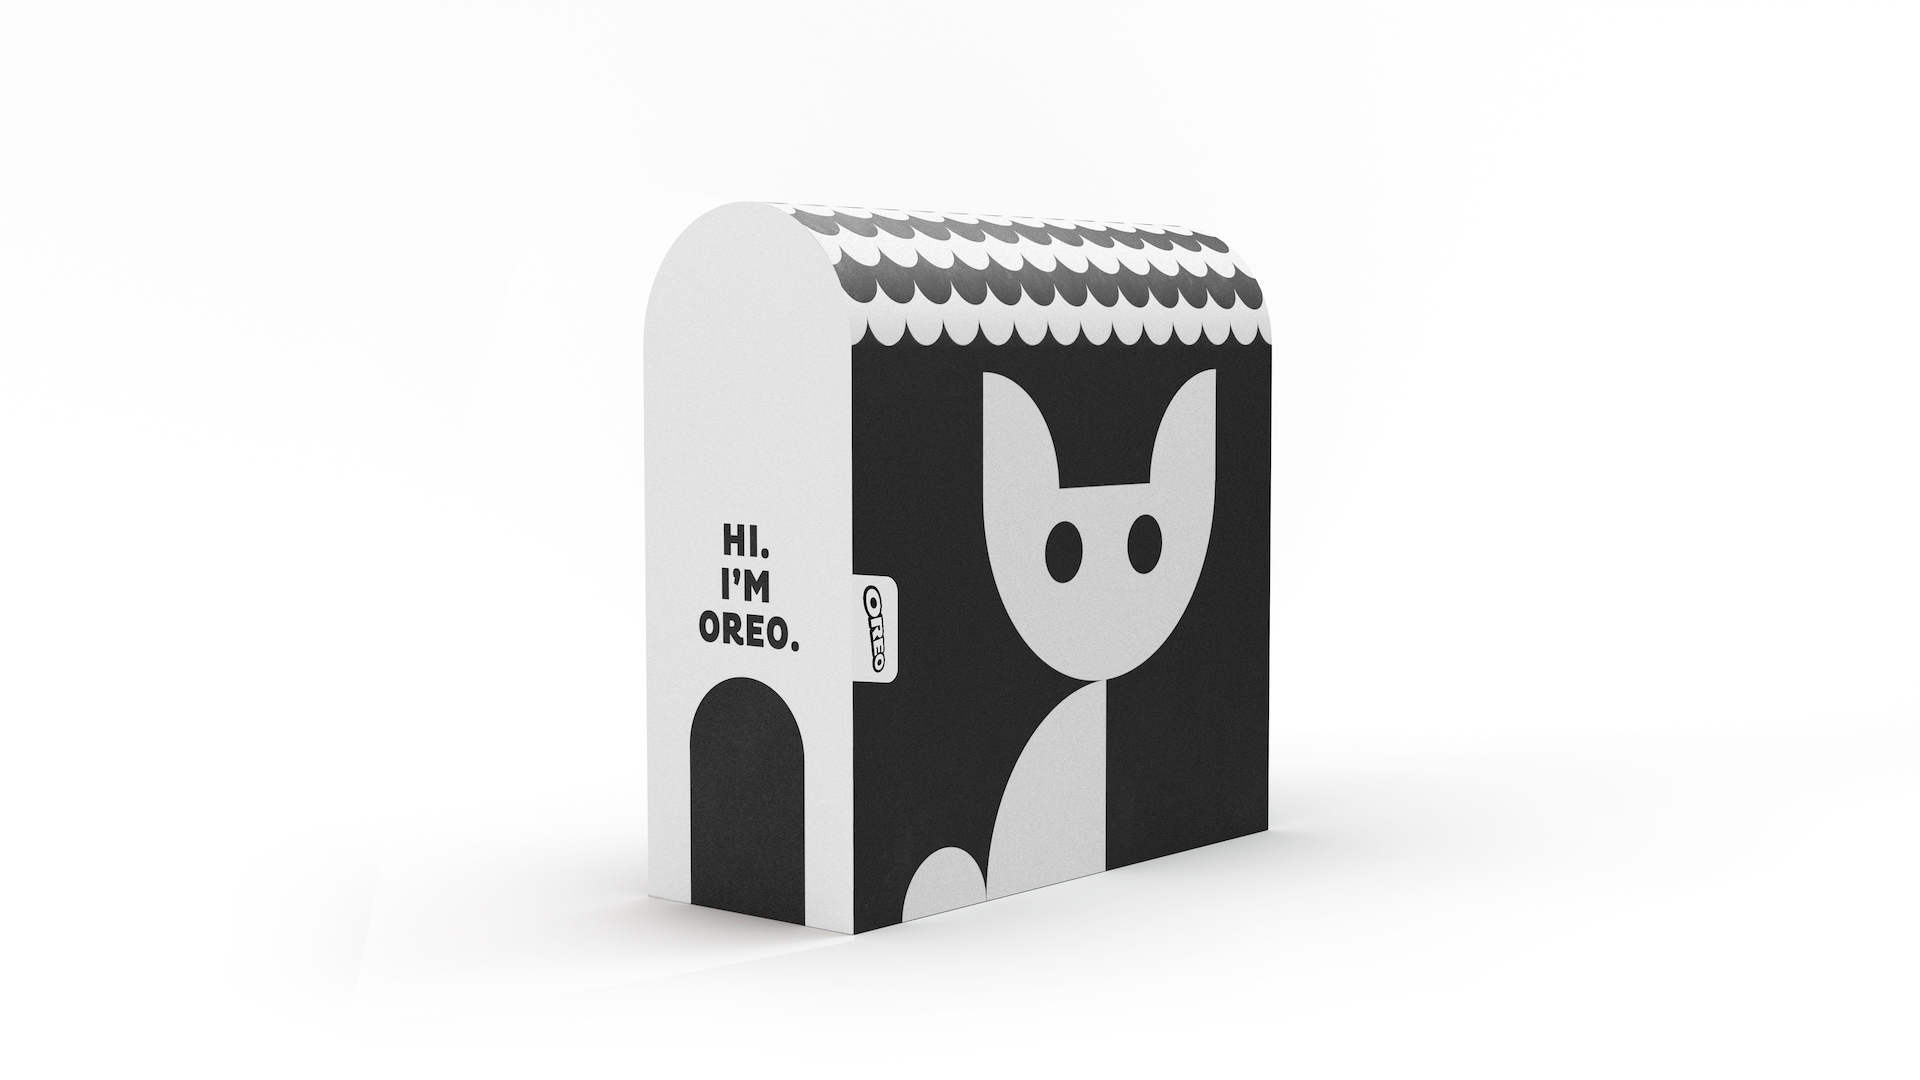 Oreo and Friends Packaging Design by Saatchi & Saatchi - World Brand Design  Society